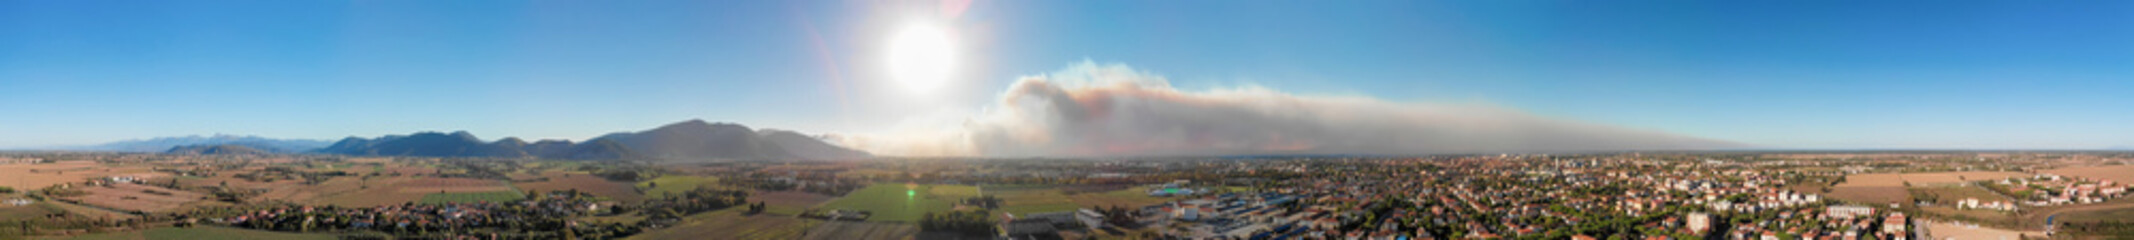 Aerial view of countryside with Arson. Smoke towards the sky, view from drone